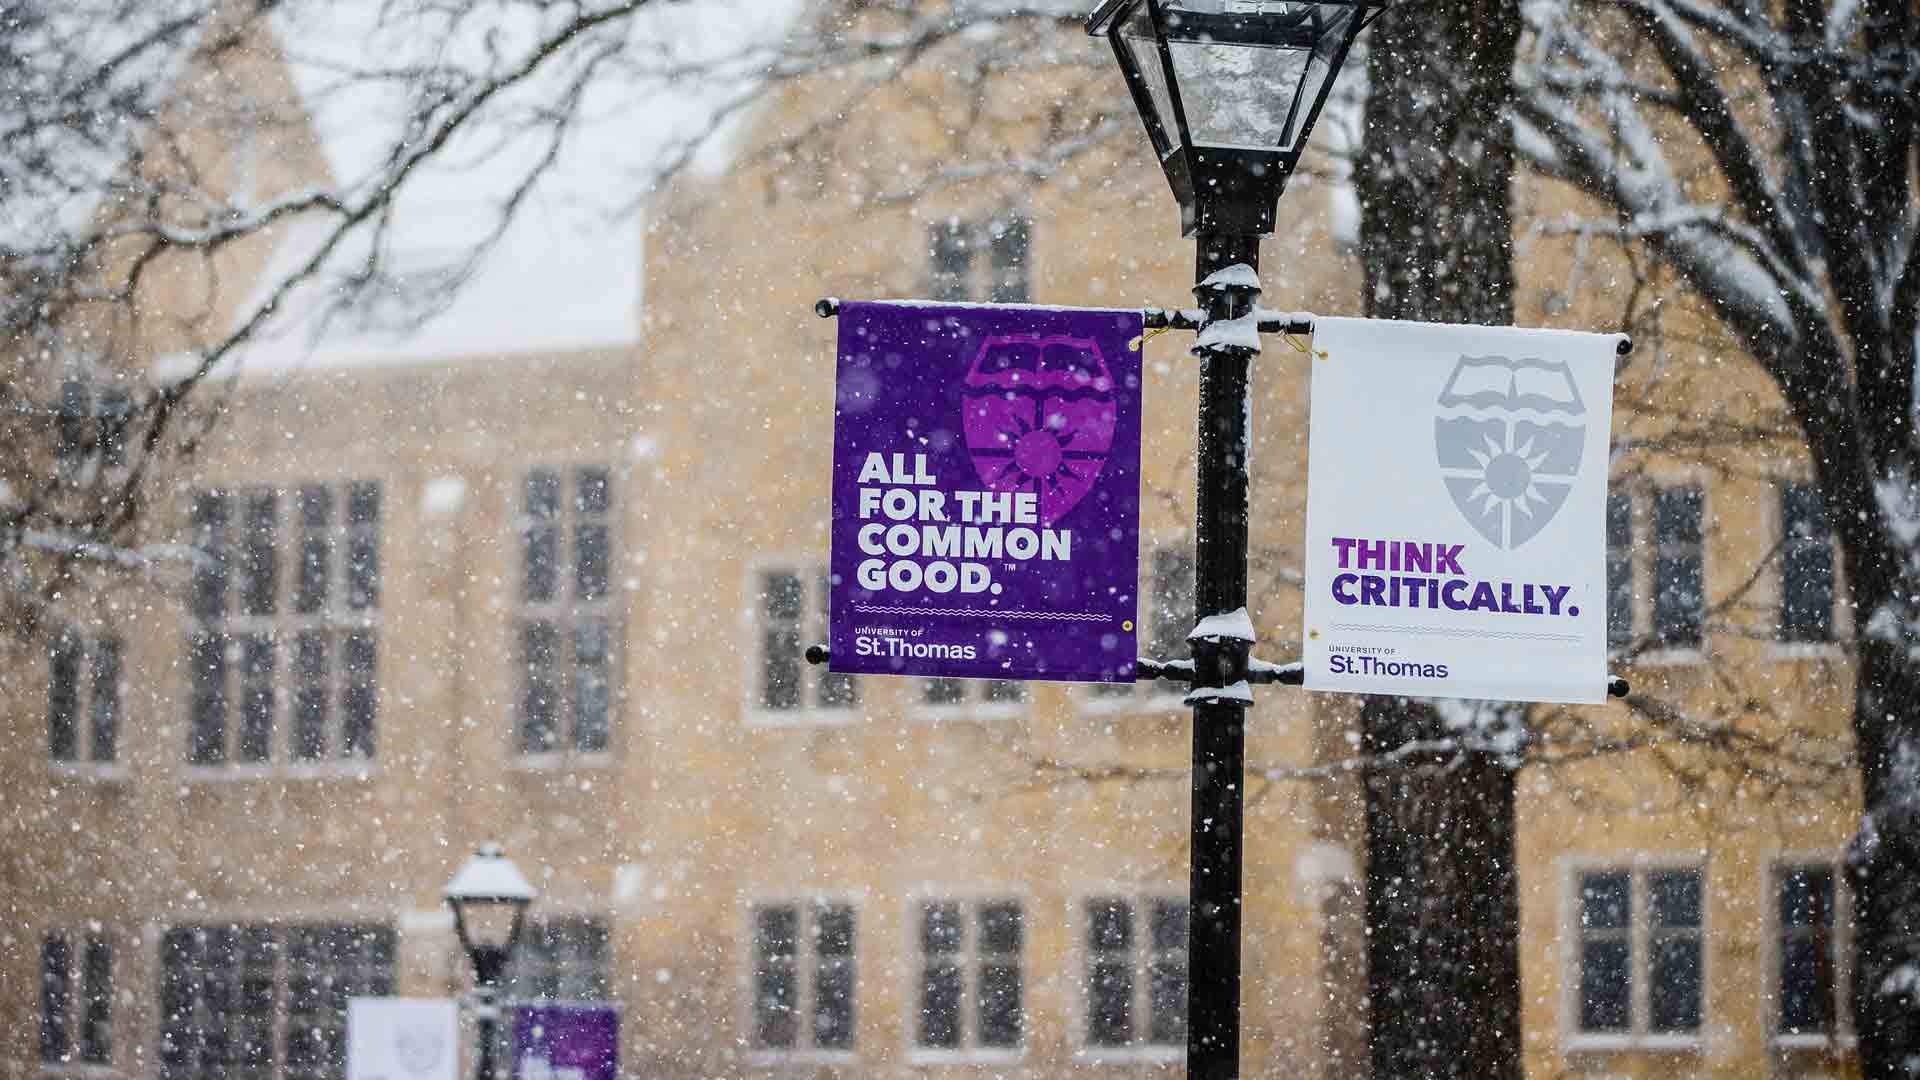 Two University of St. Thomas branded banners, the one on the left reads "All for the common good." The other banner has writing on it that says, "Think Critically."